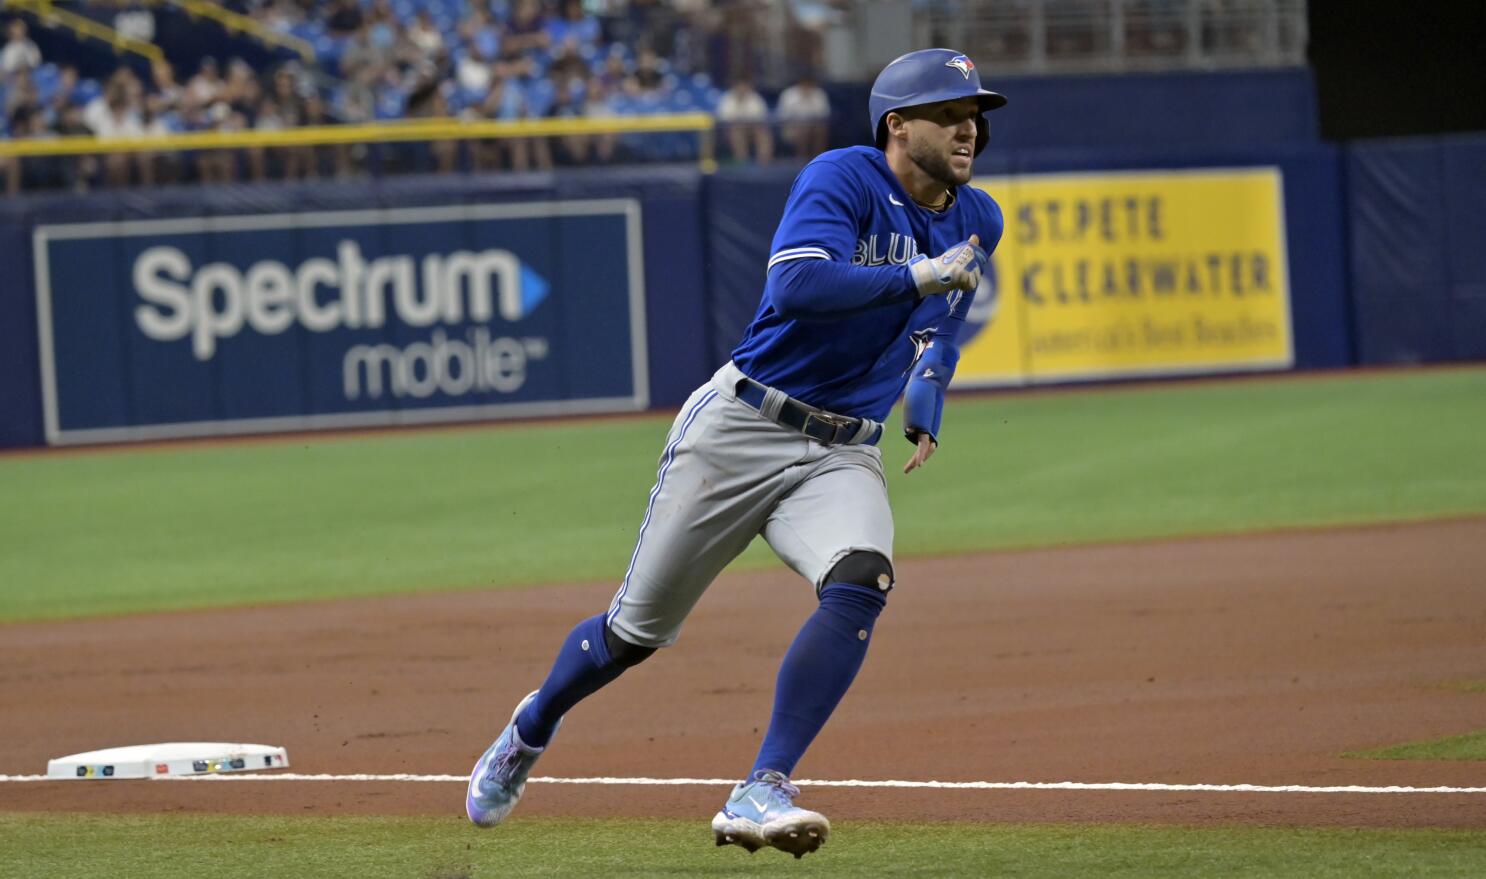 Blue Jays rout Rays 20-1 as Guerrero Jr has 6 RBIs, position